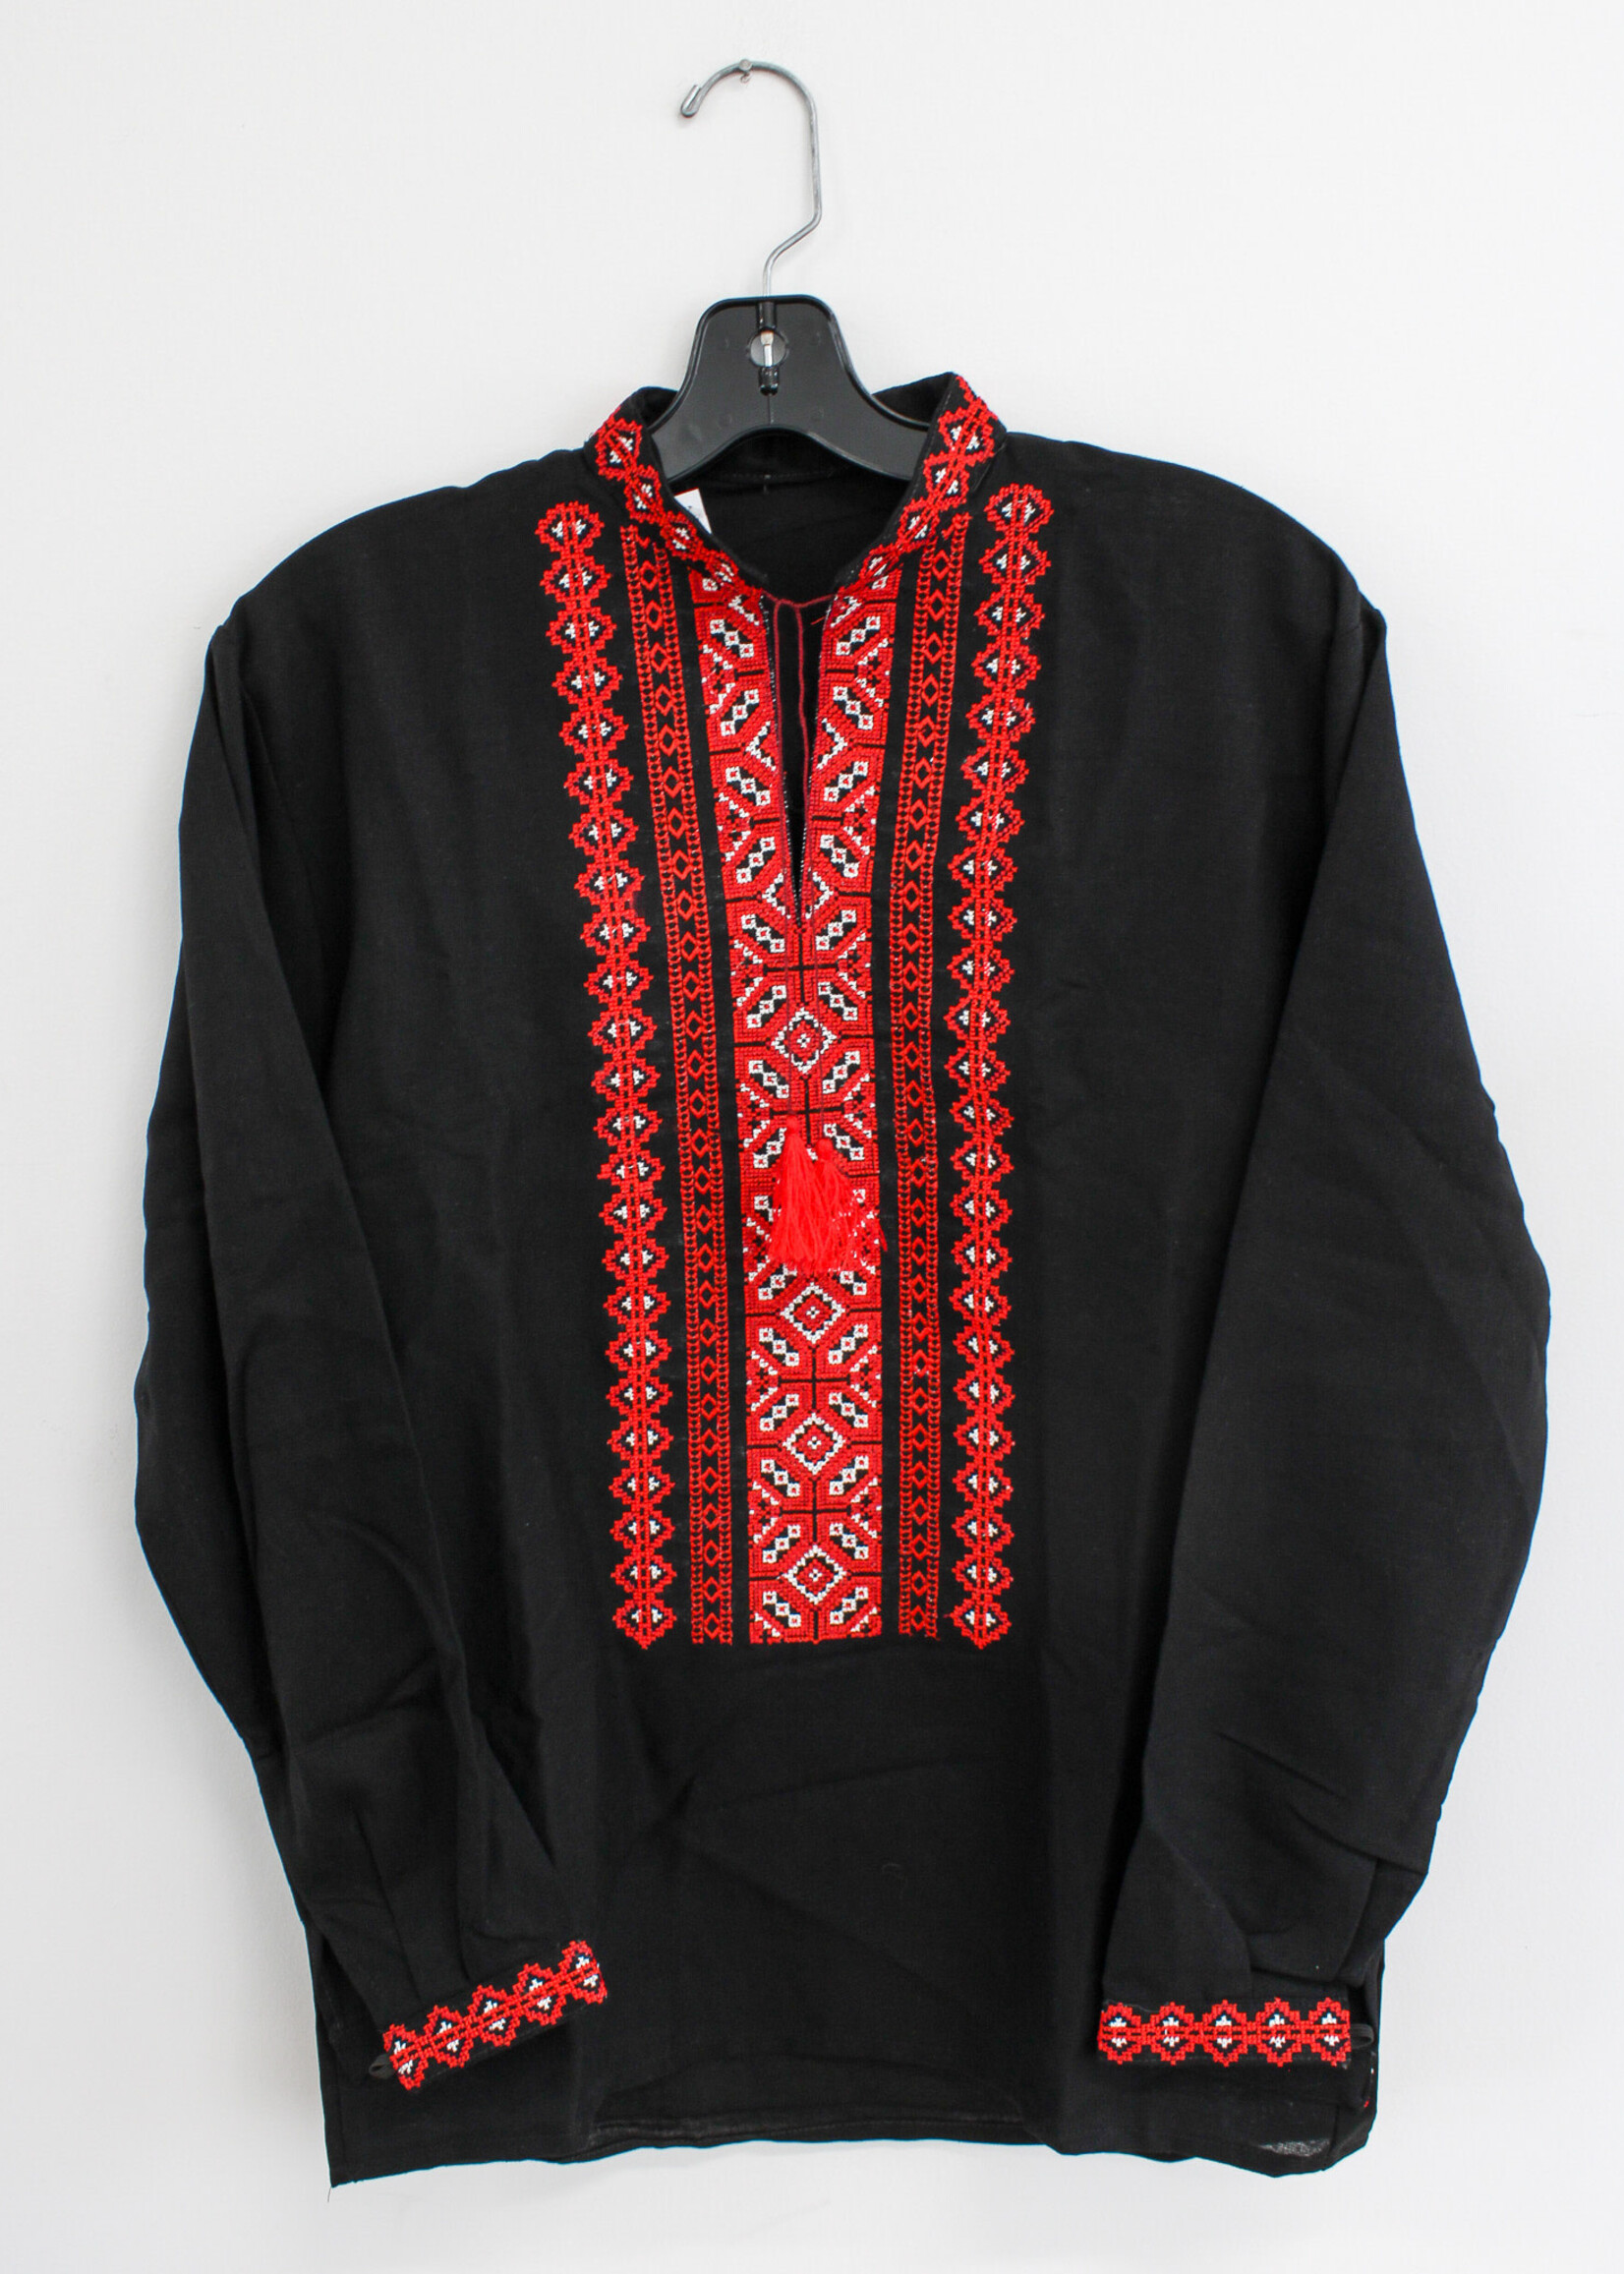 VYSHYVANKA(M)  - Chest 40 in. Length 28in. Black with red/white embroidery